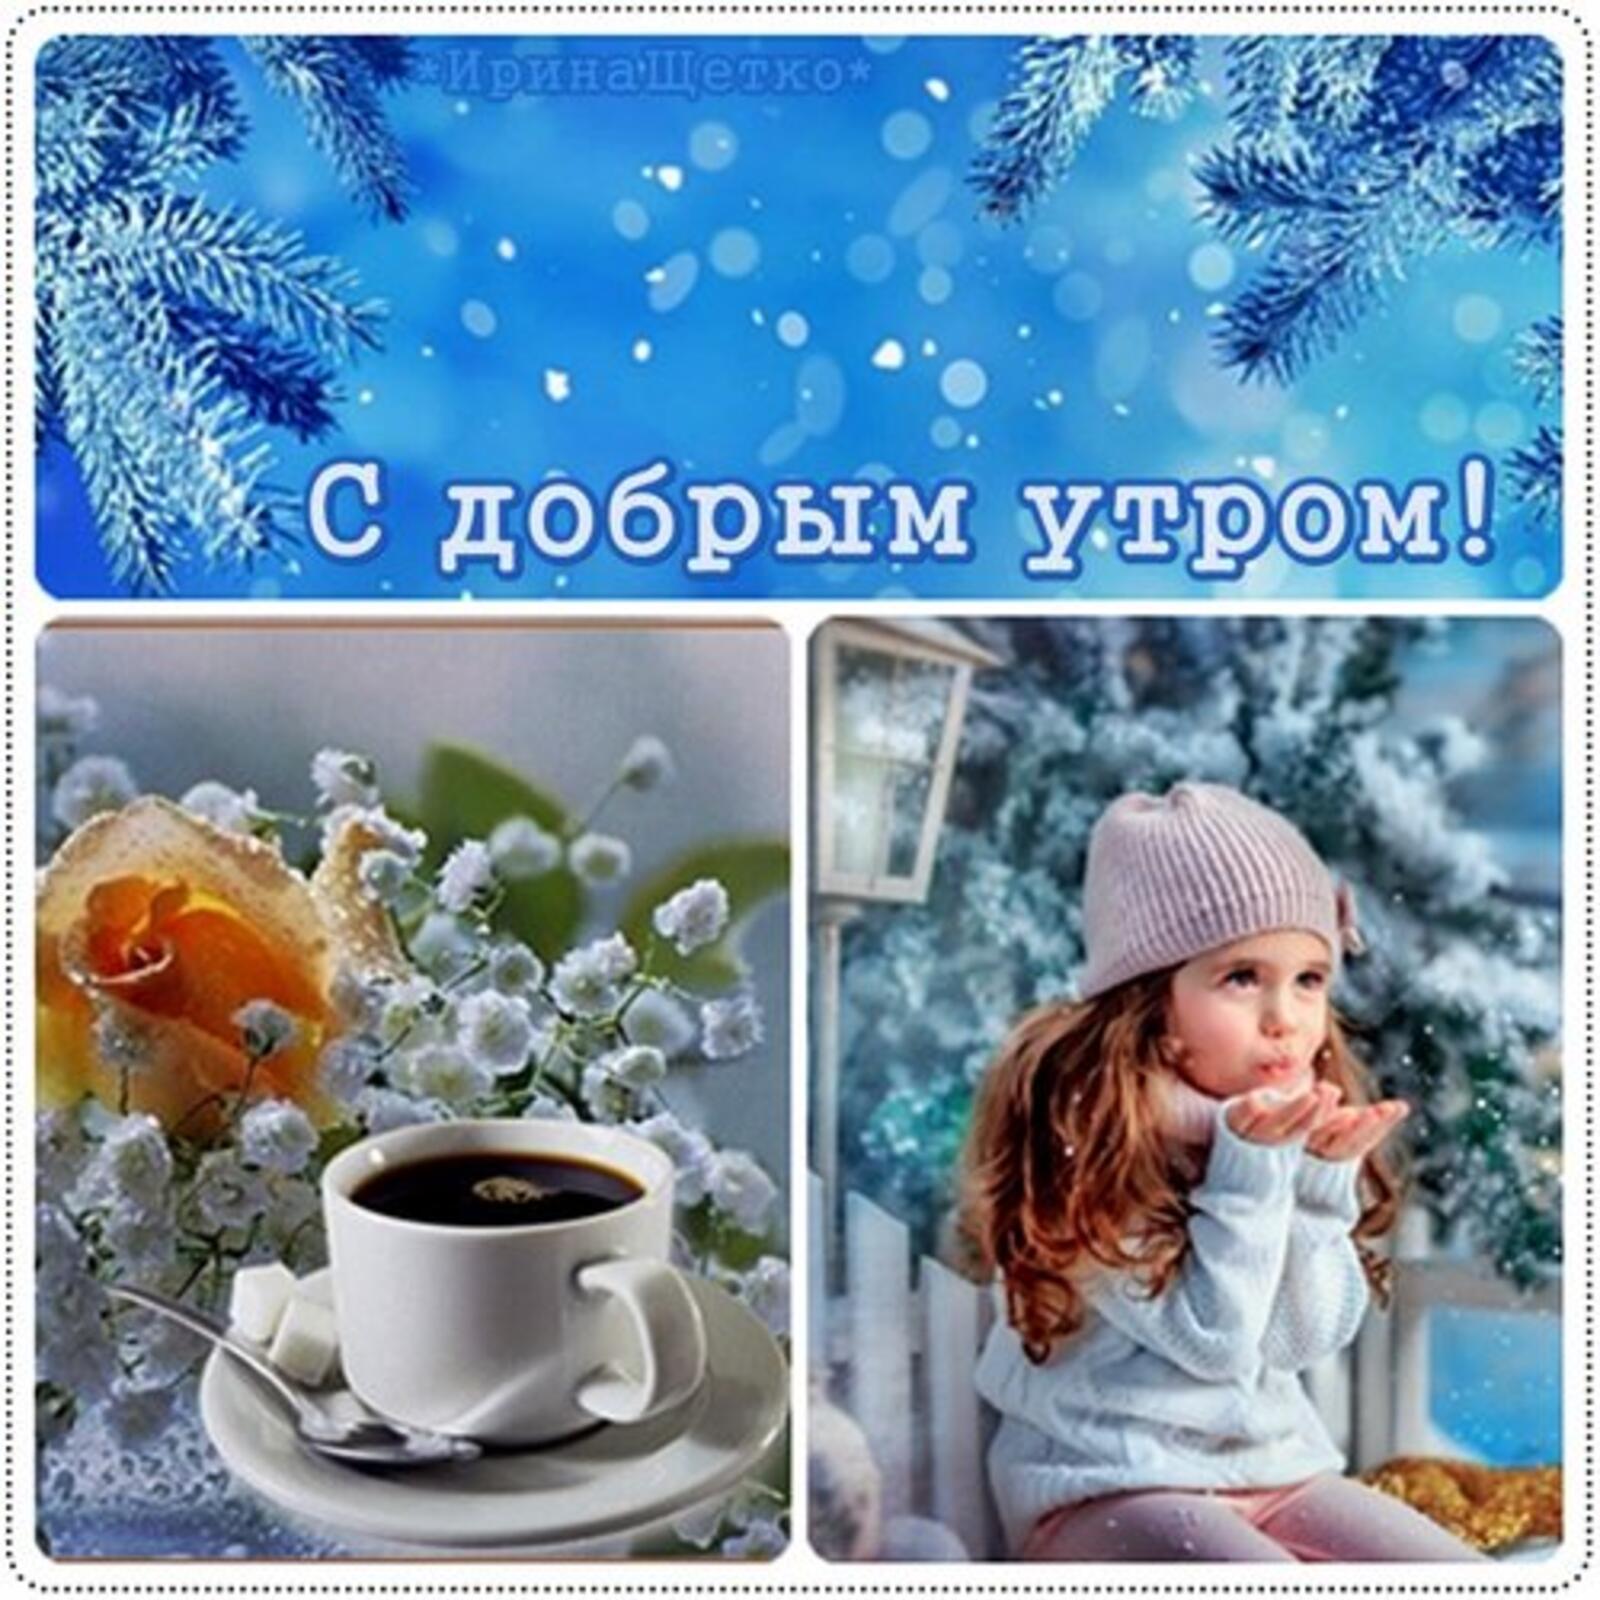 A postcard on the subject of good morning good winter thursday morning miscellaneous for free